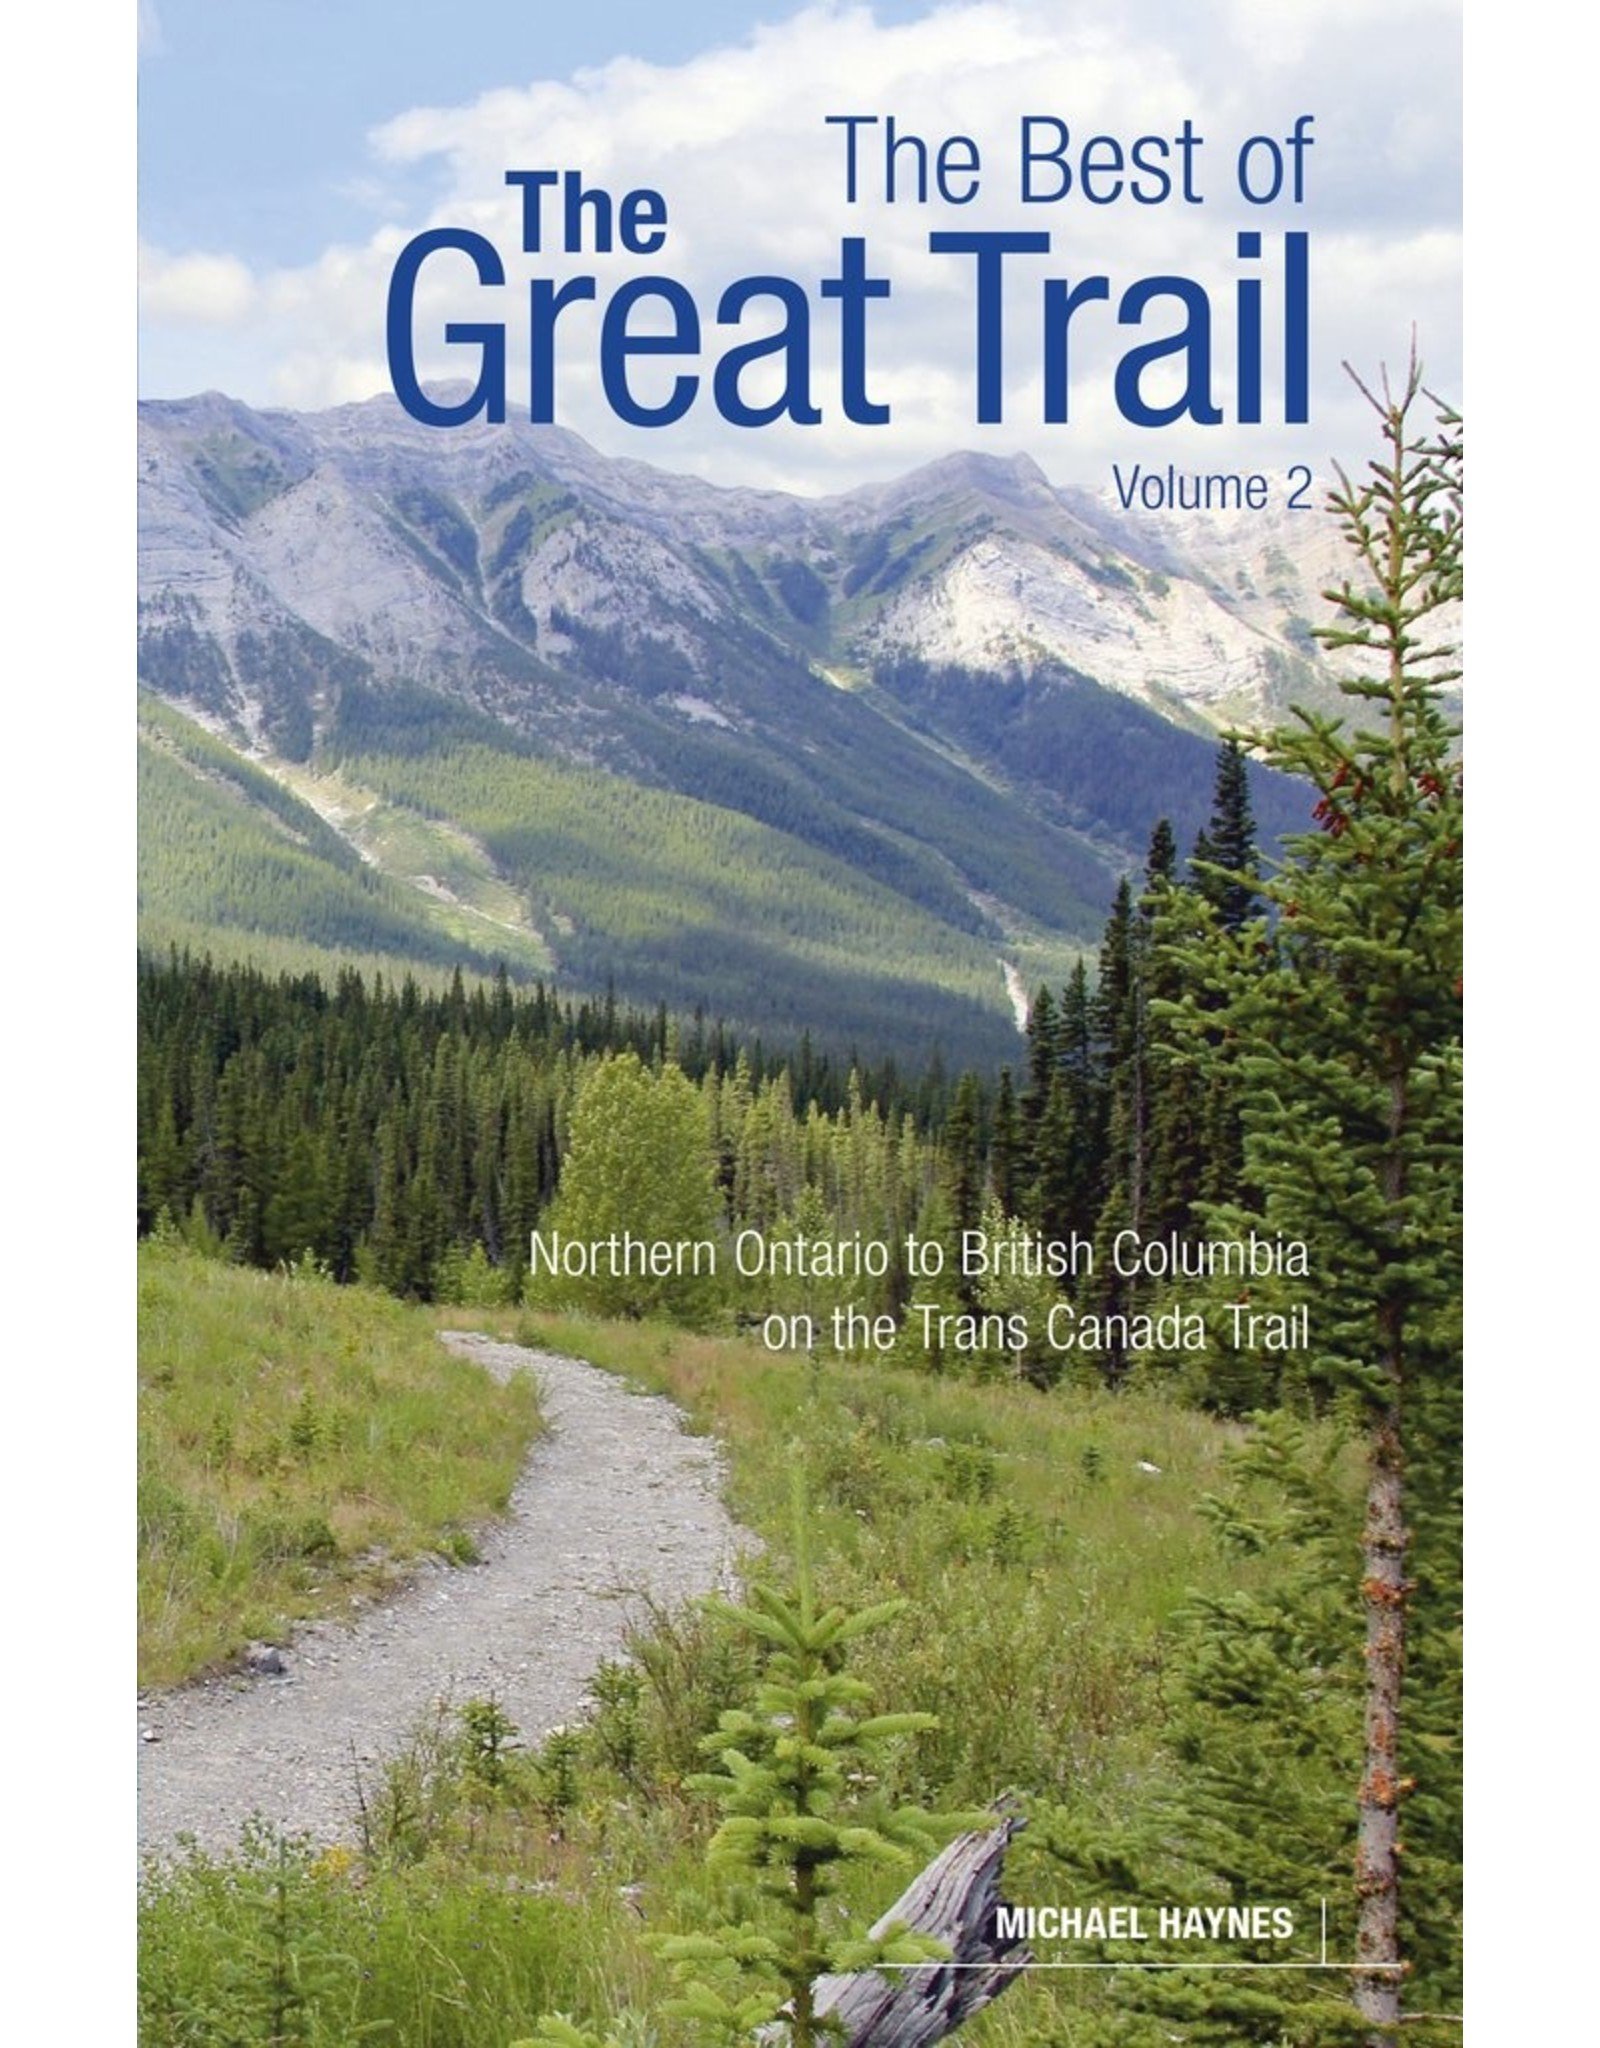 The Best of The Great Trail Volume 2